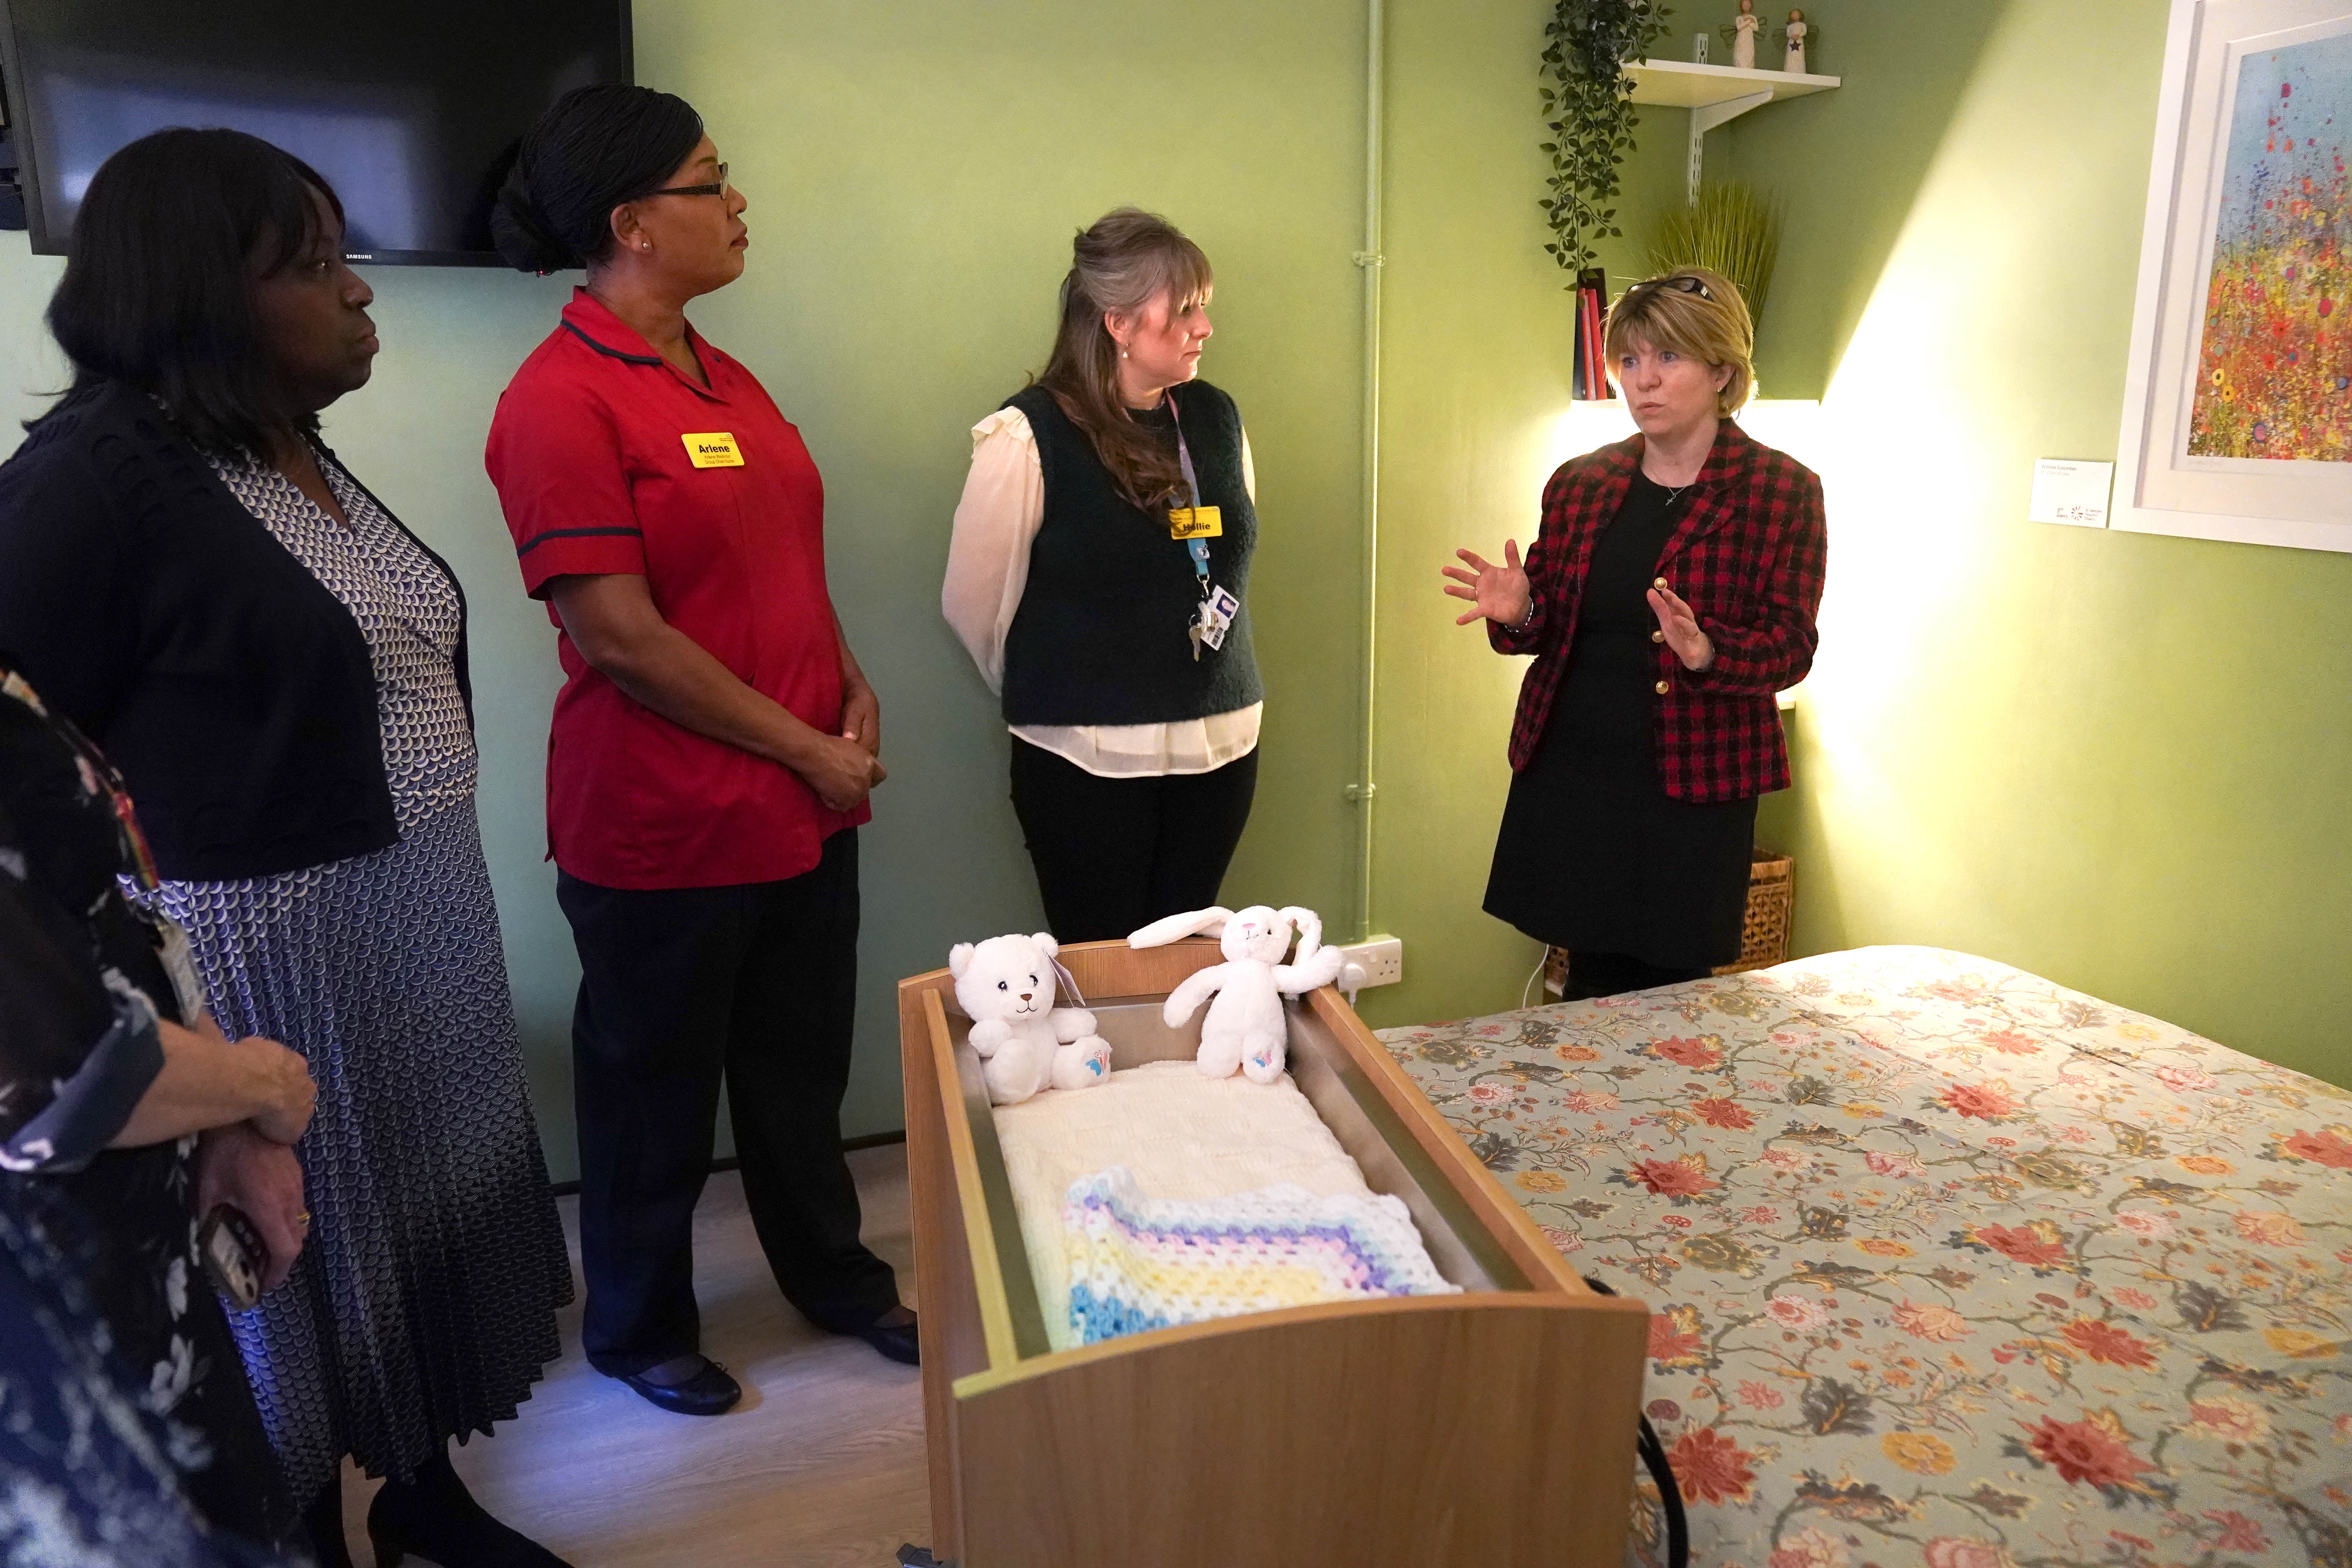 Health minister Maria Caulfield (right) during a visit St George’s Hospital in Tooting